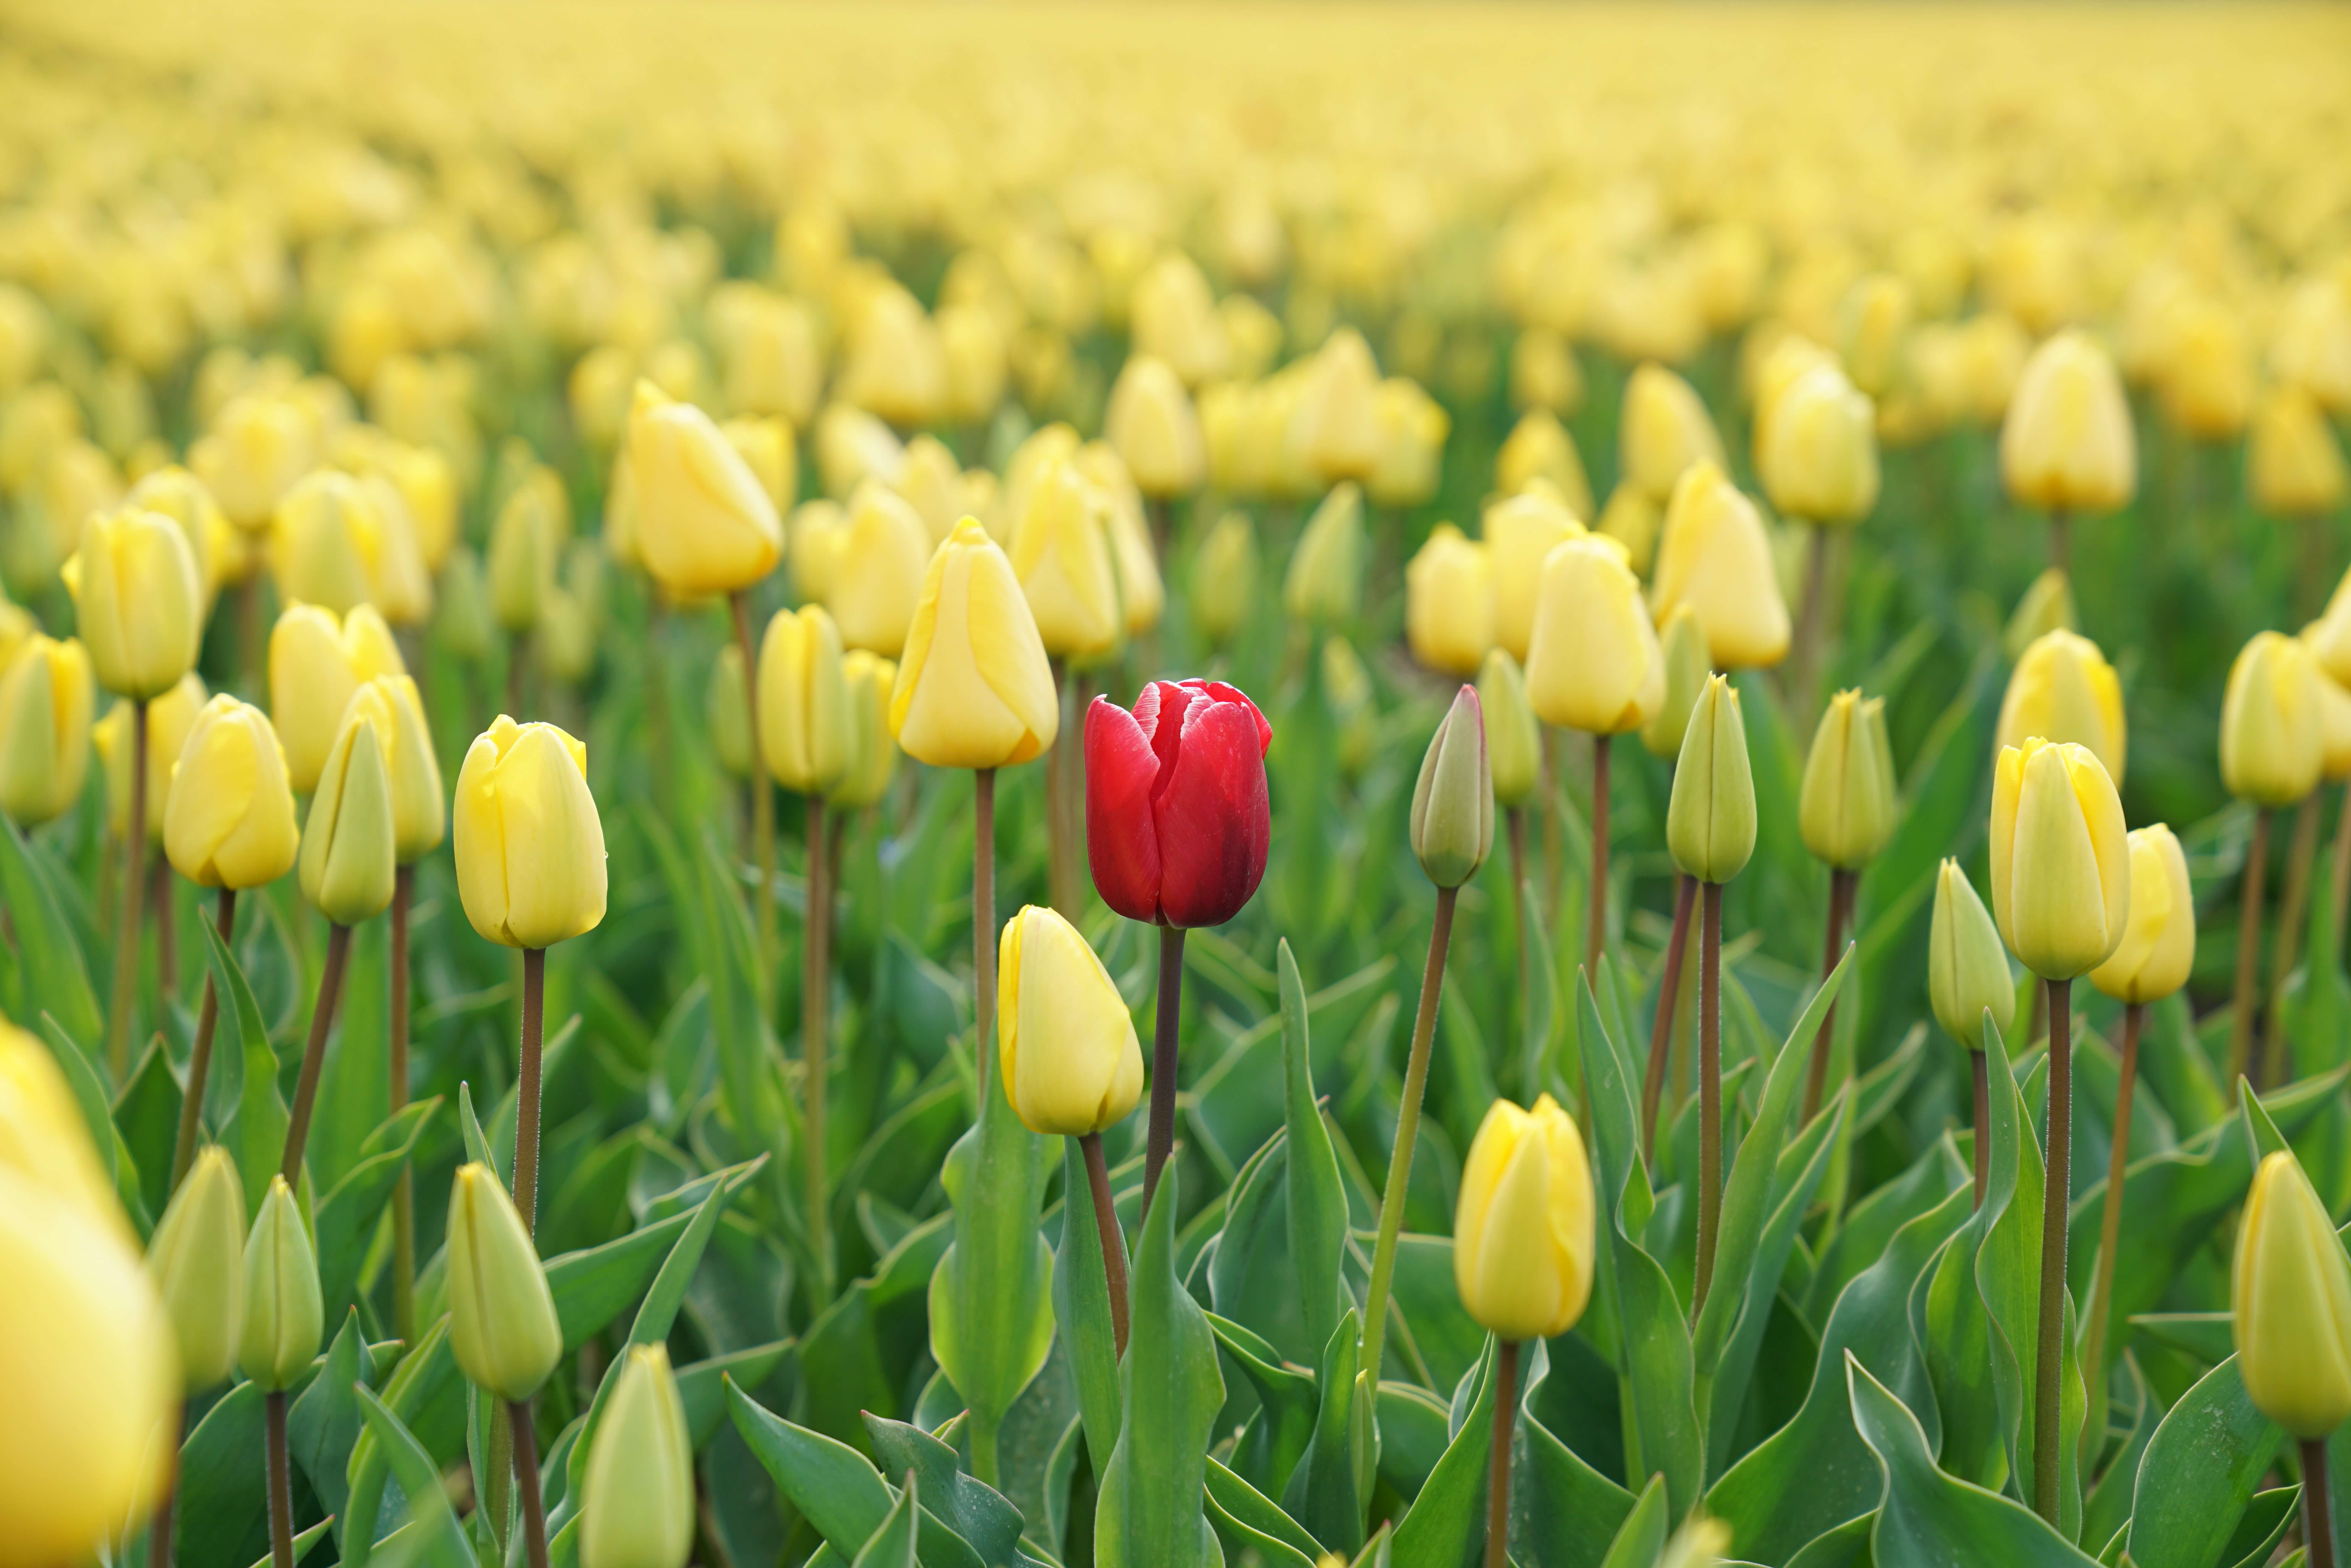 A red tulip surrounded by yellow tulips